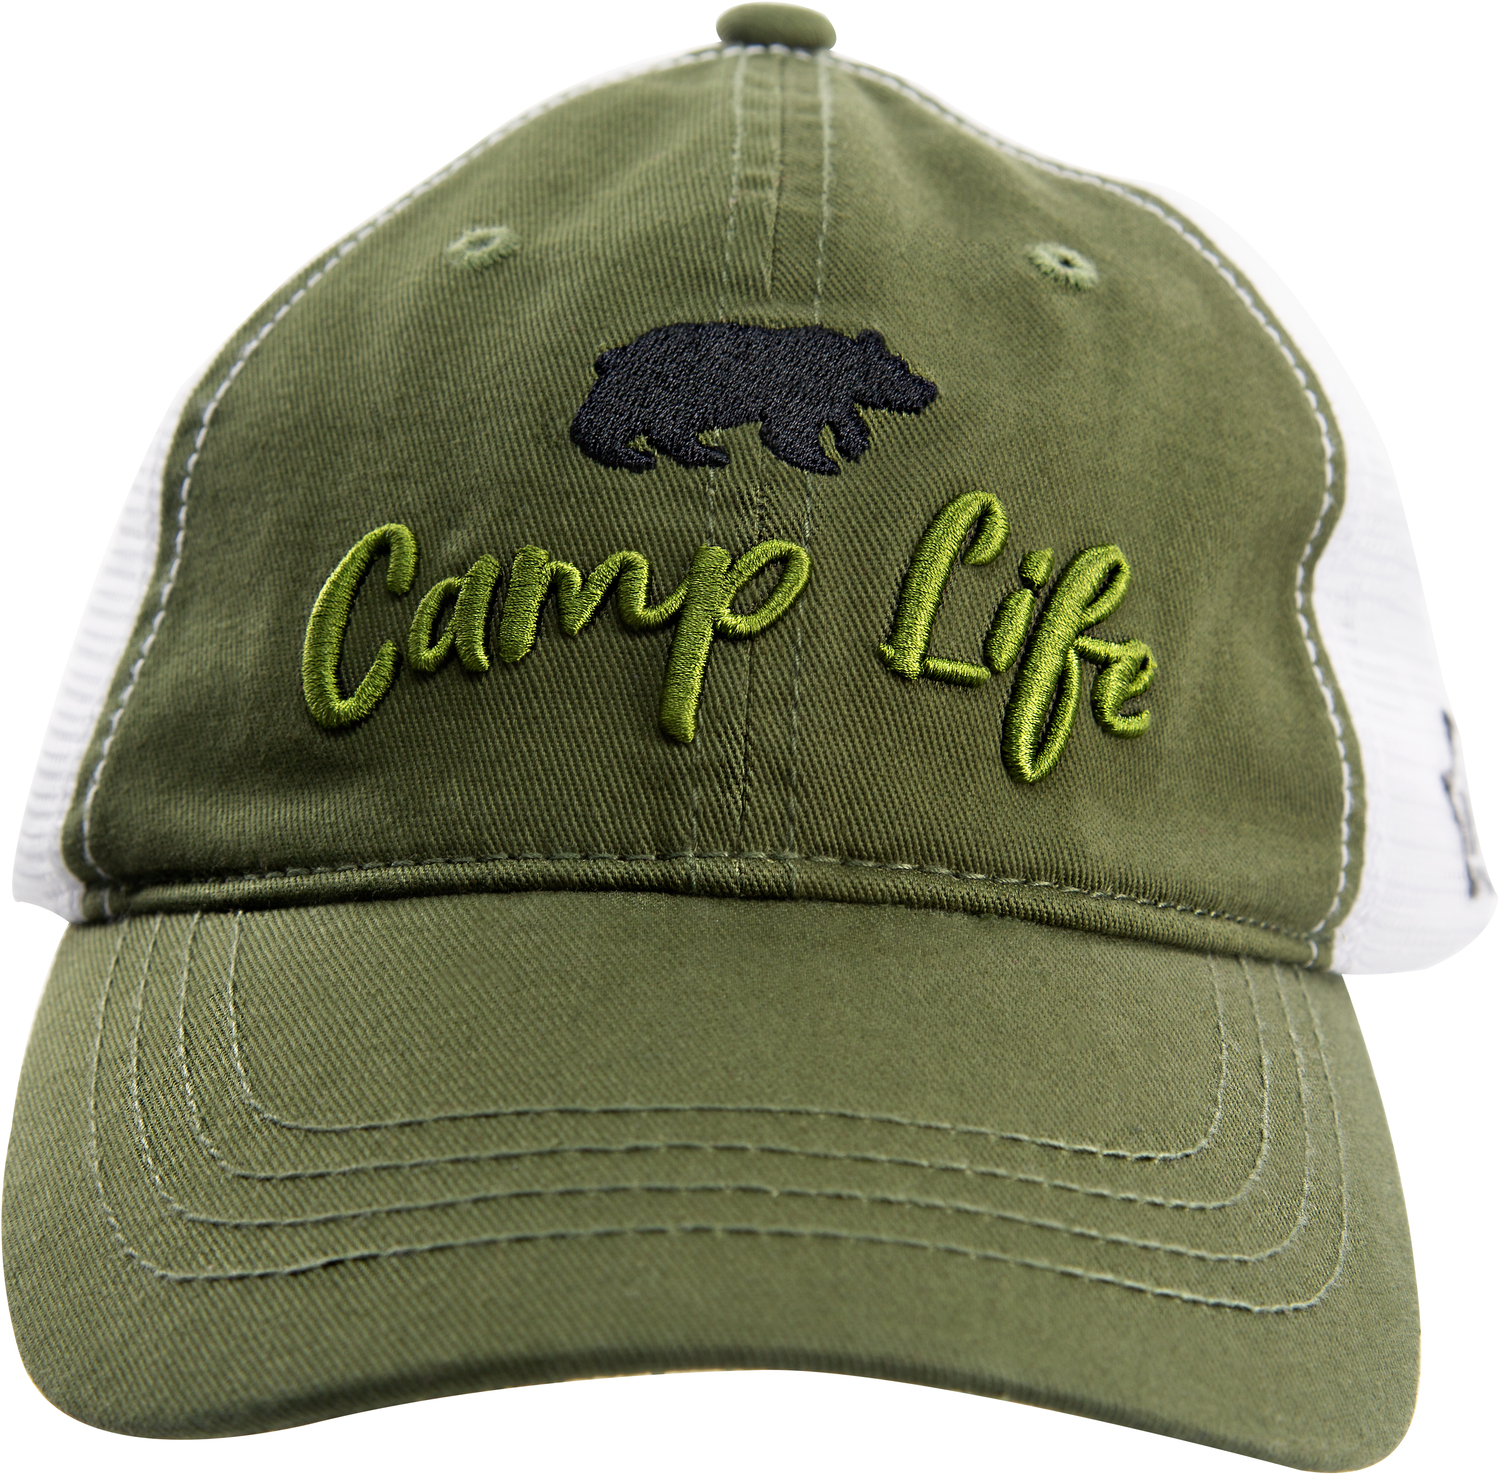 Camp by We People - Camp - Olive Green Adjustable Mesh Hat